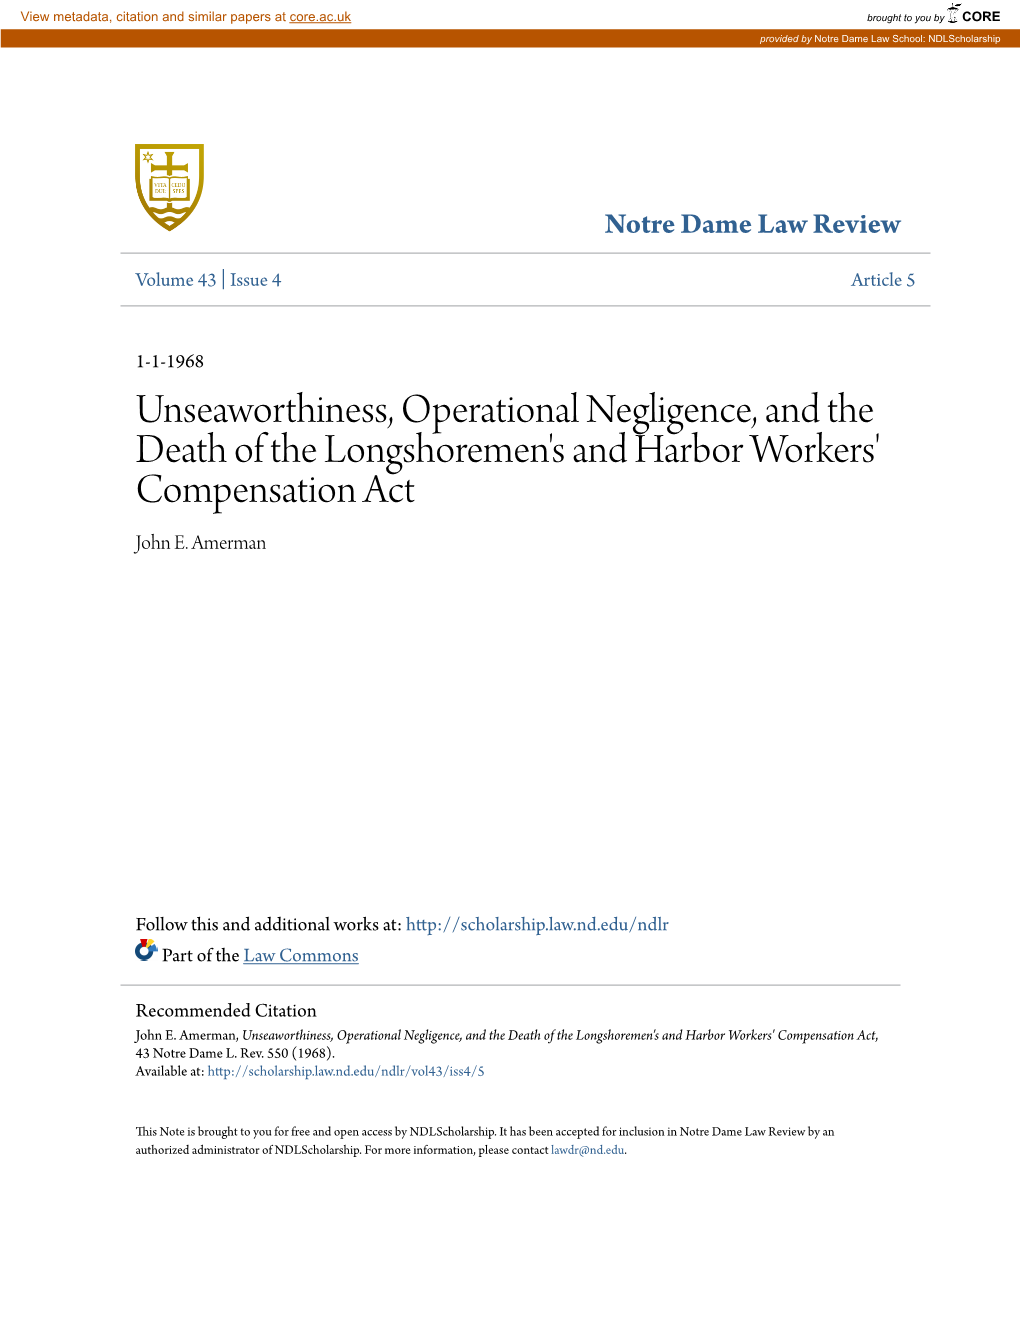 Unseaworthiness, Operational Negligence, and the Death of the Longshoremen's and Harbor Workers' Compensation Act John E